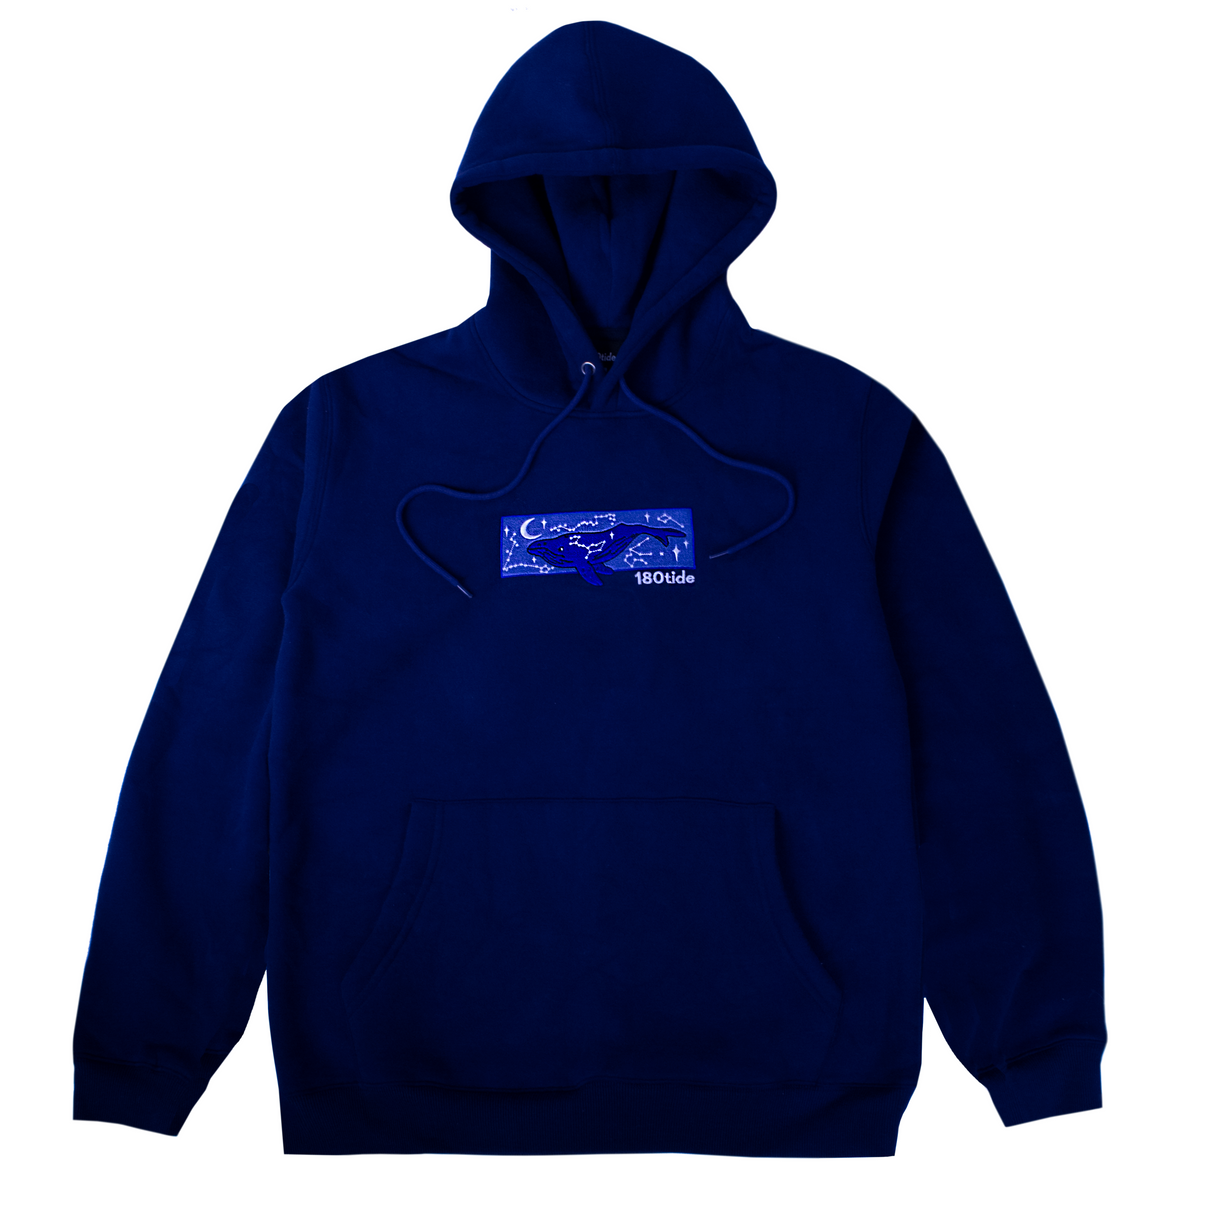 Whale Constellations Embroidered Navy Blue Hoodie – 180tide